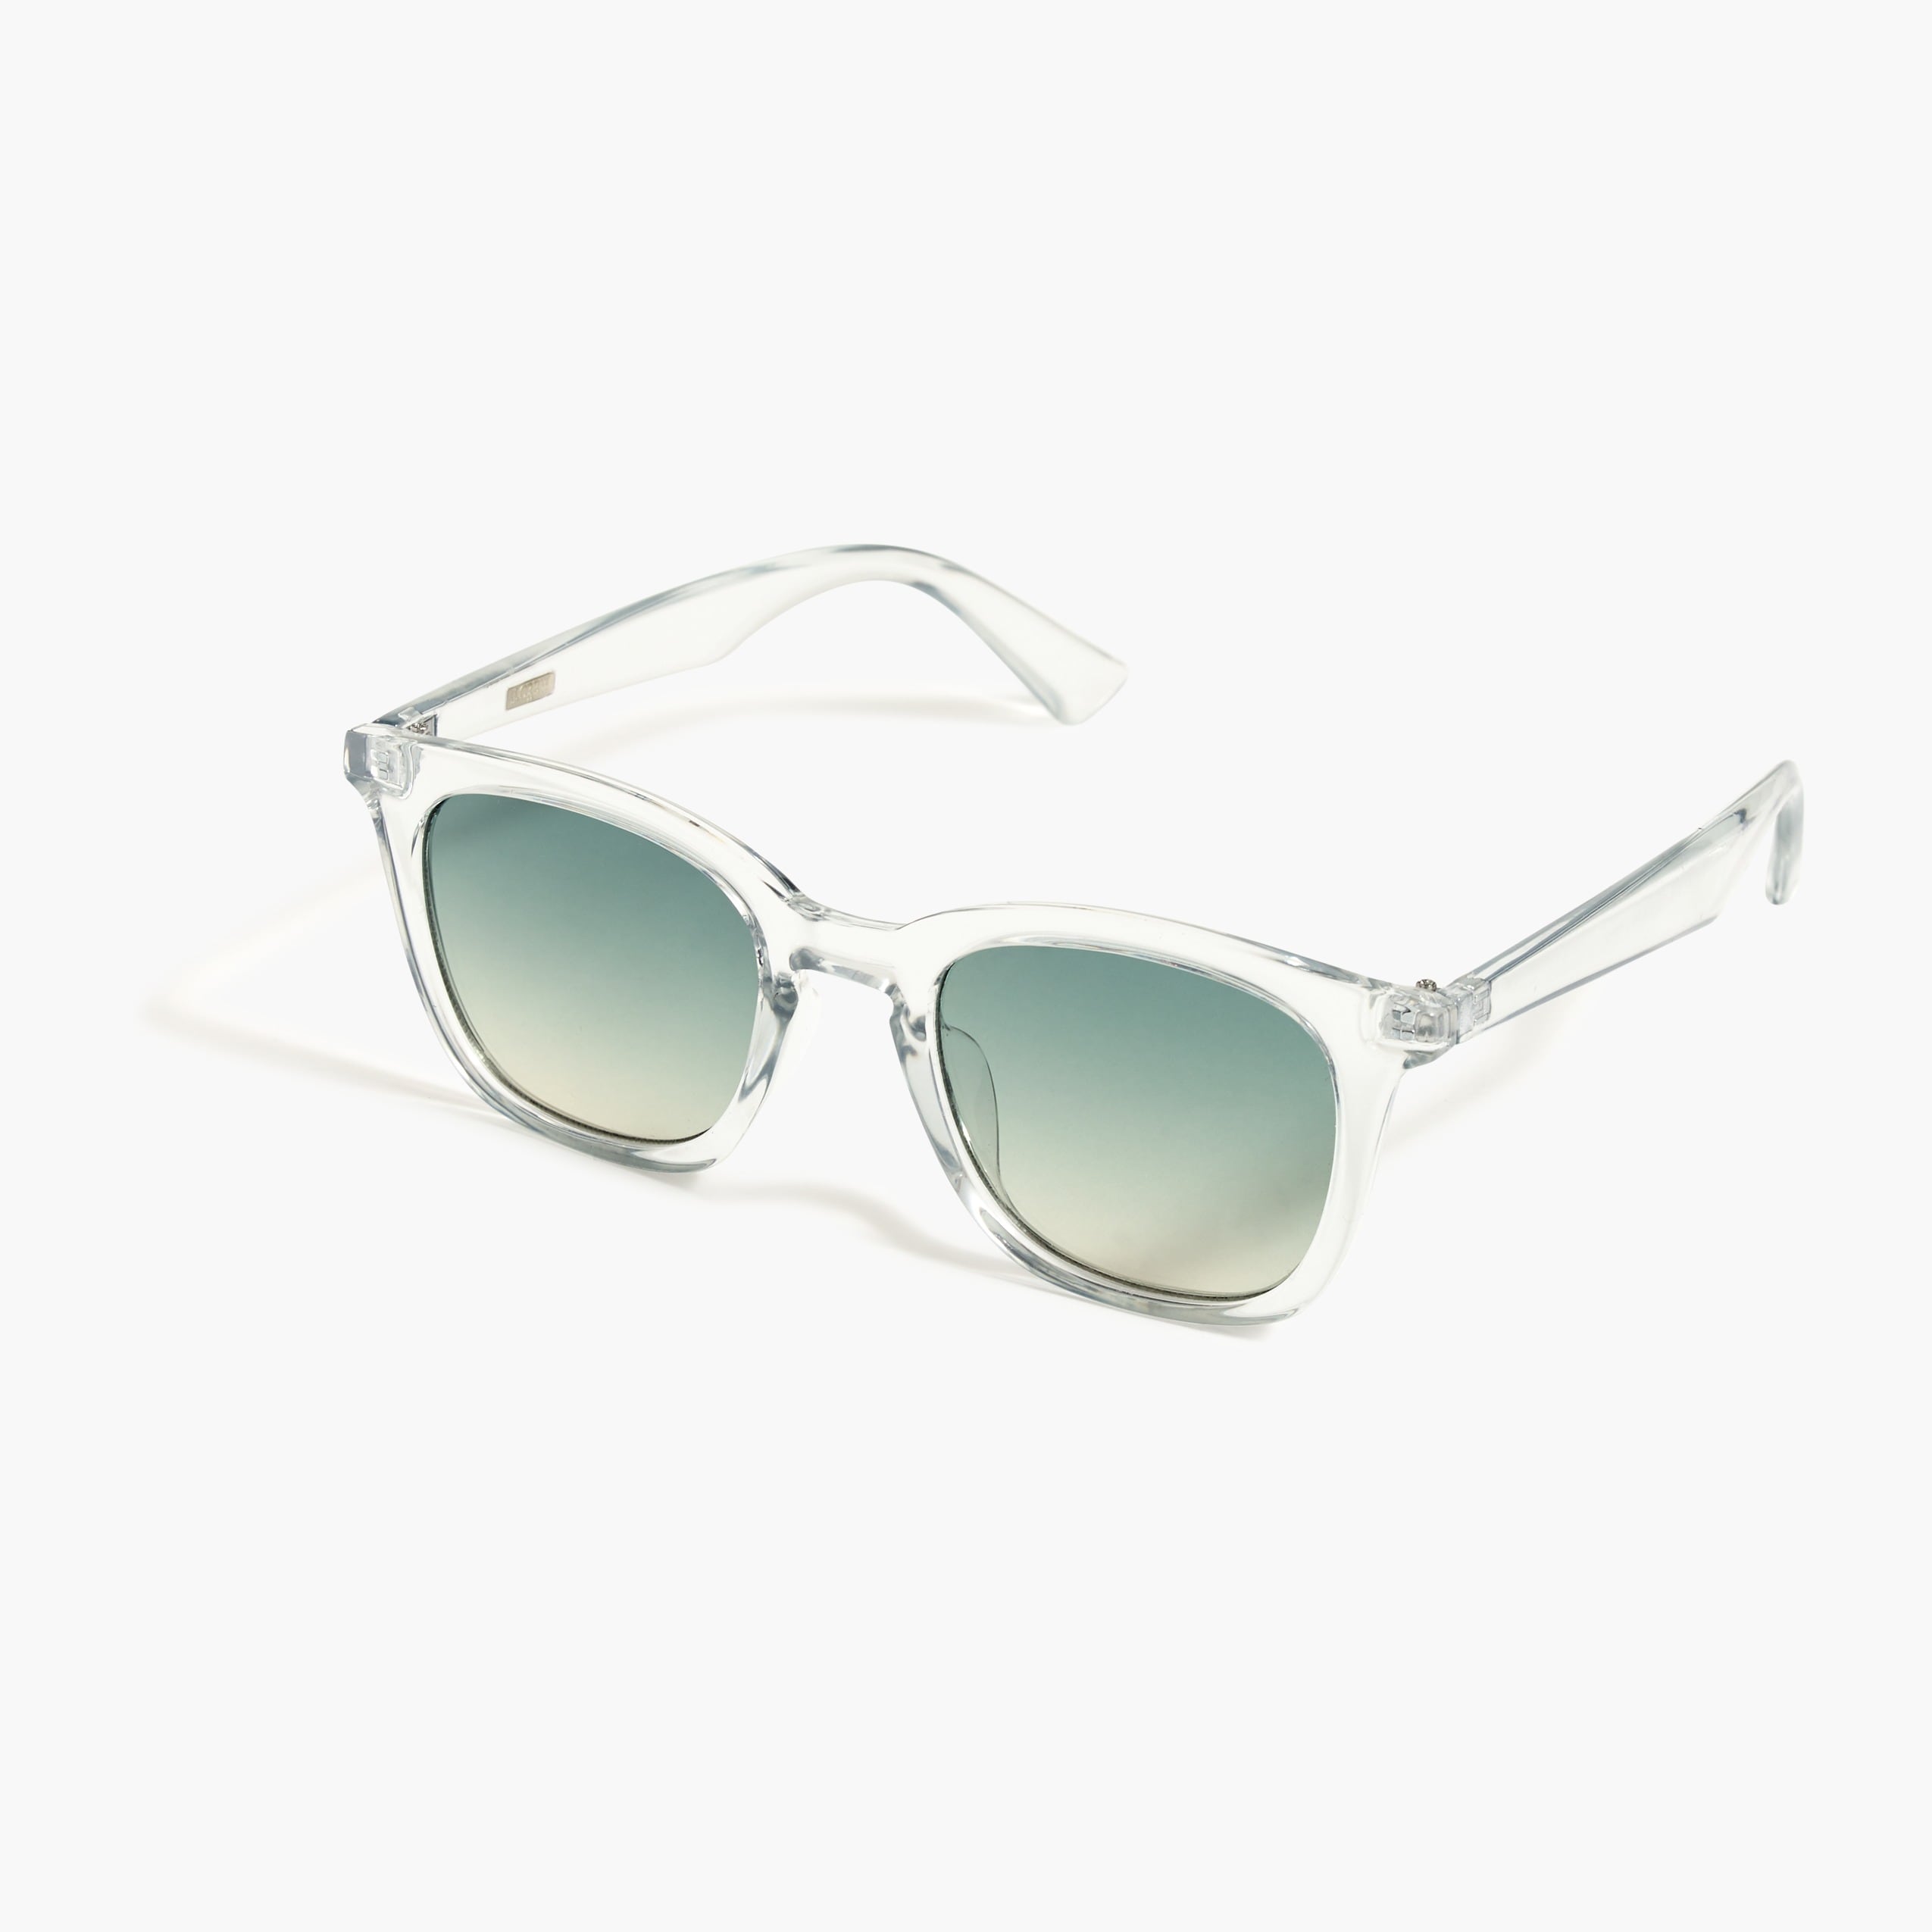 Clear square-frame sunglasses